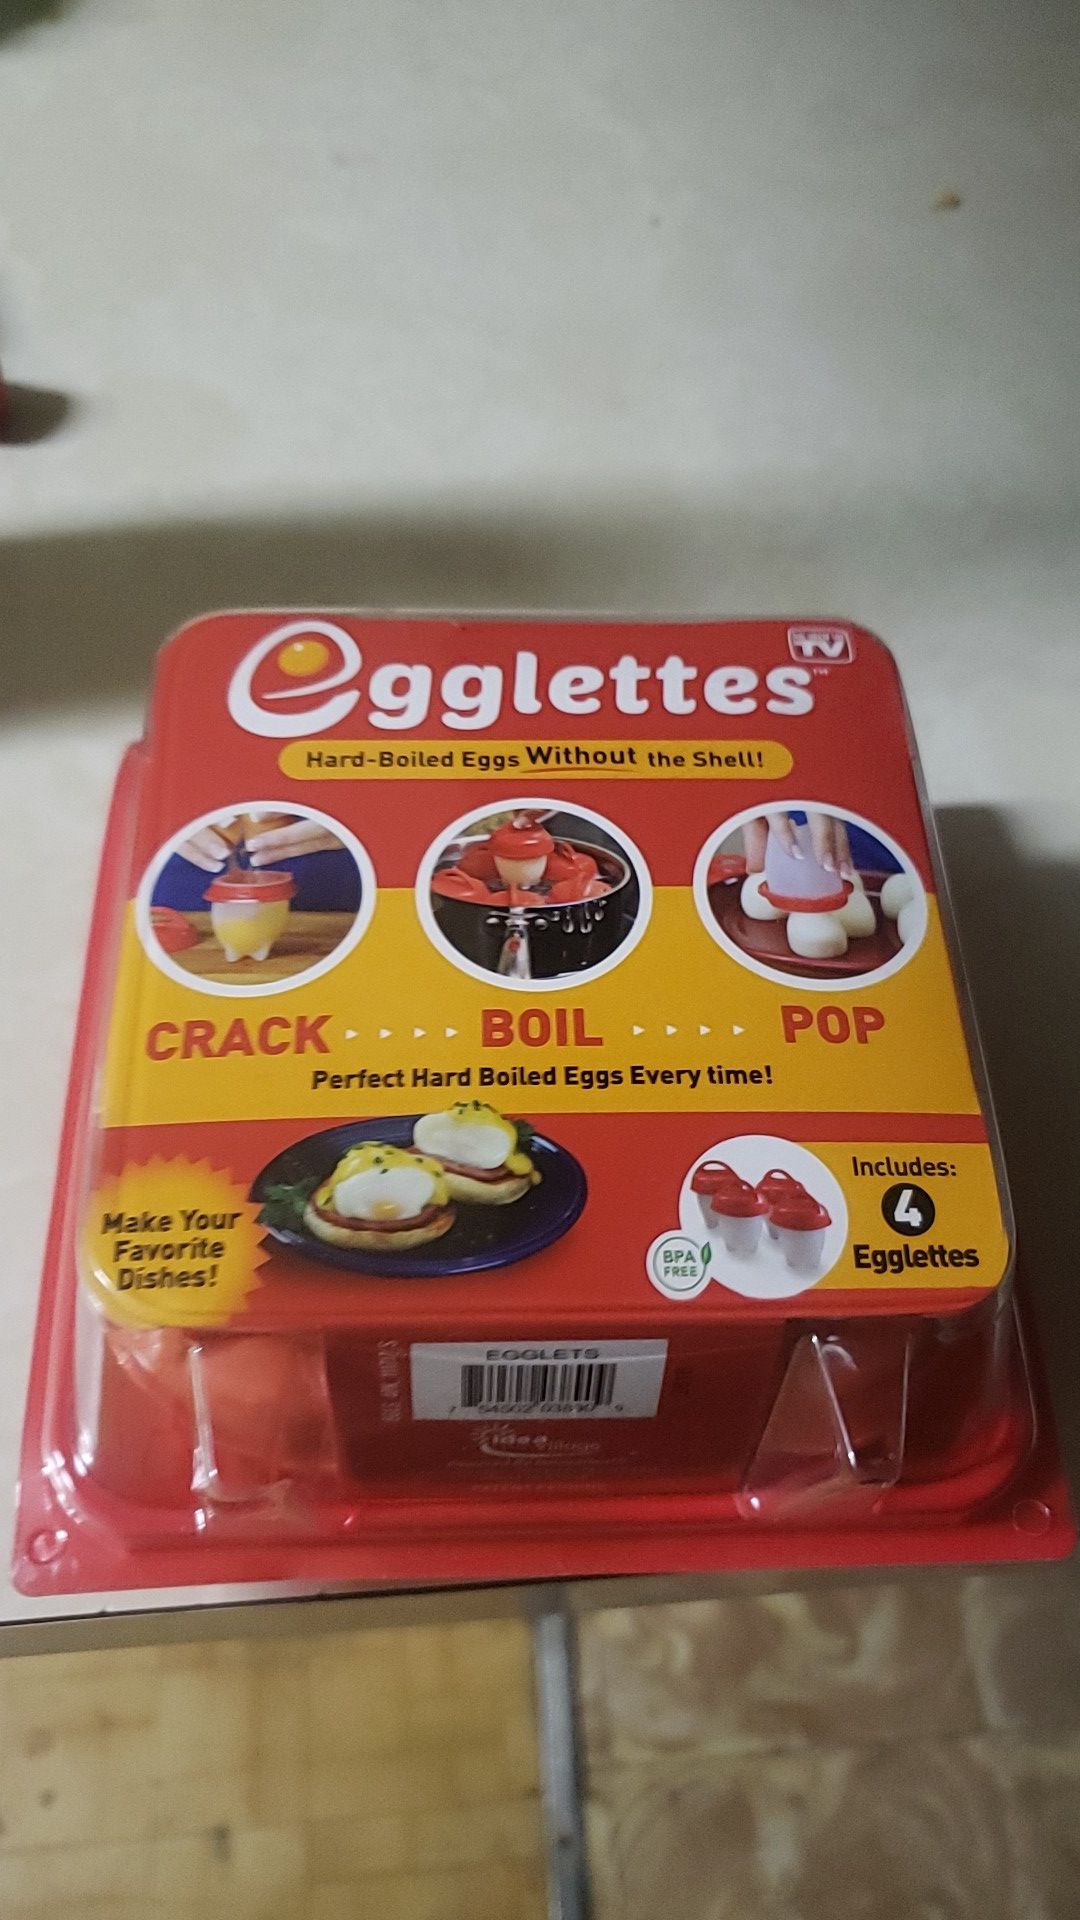 Egglettes - includes 4